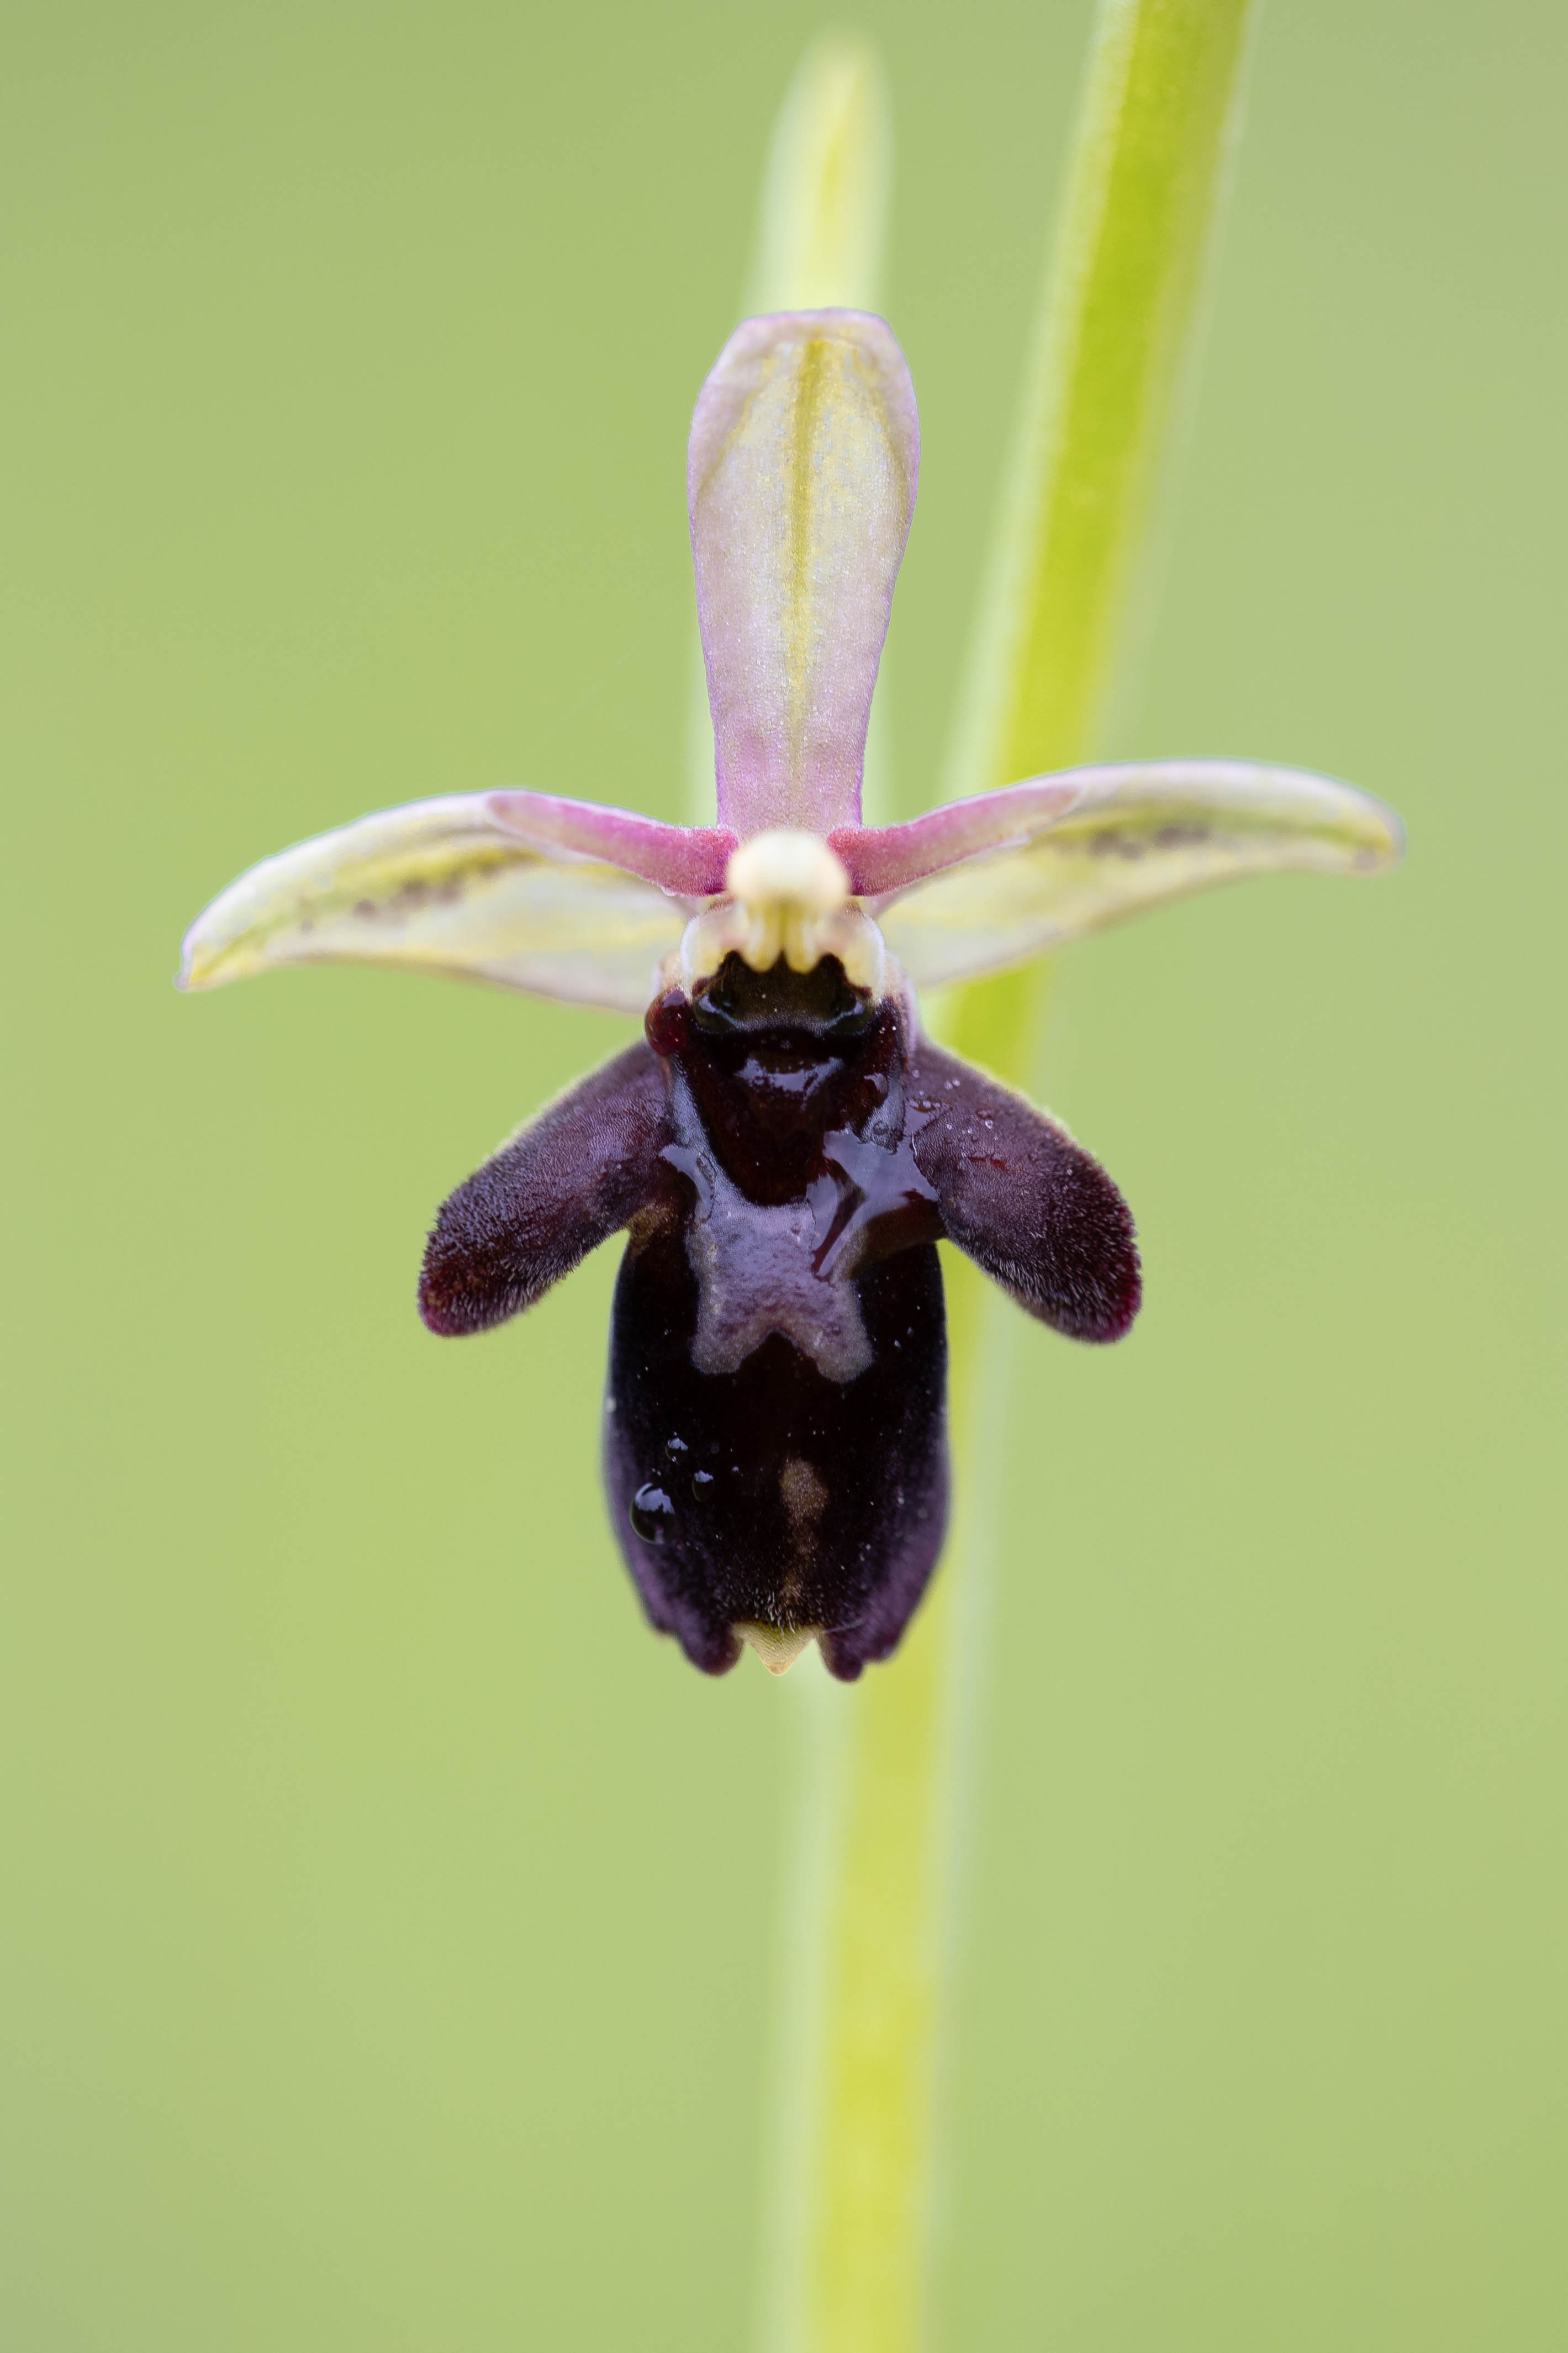  Late Spider-orchid (Ophrys fuciflora)